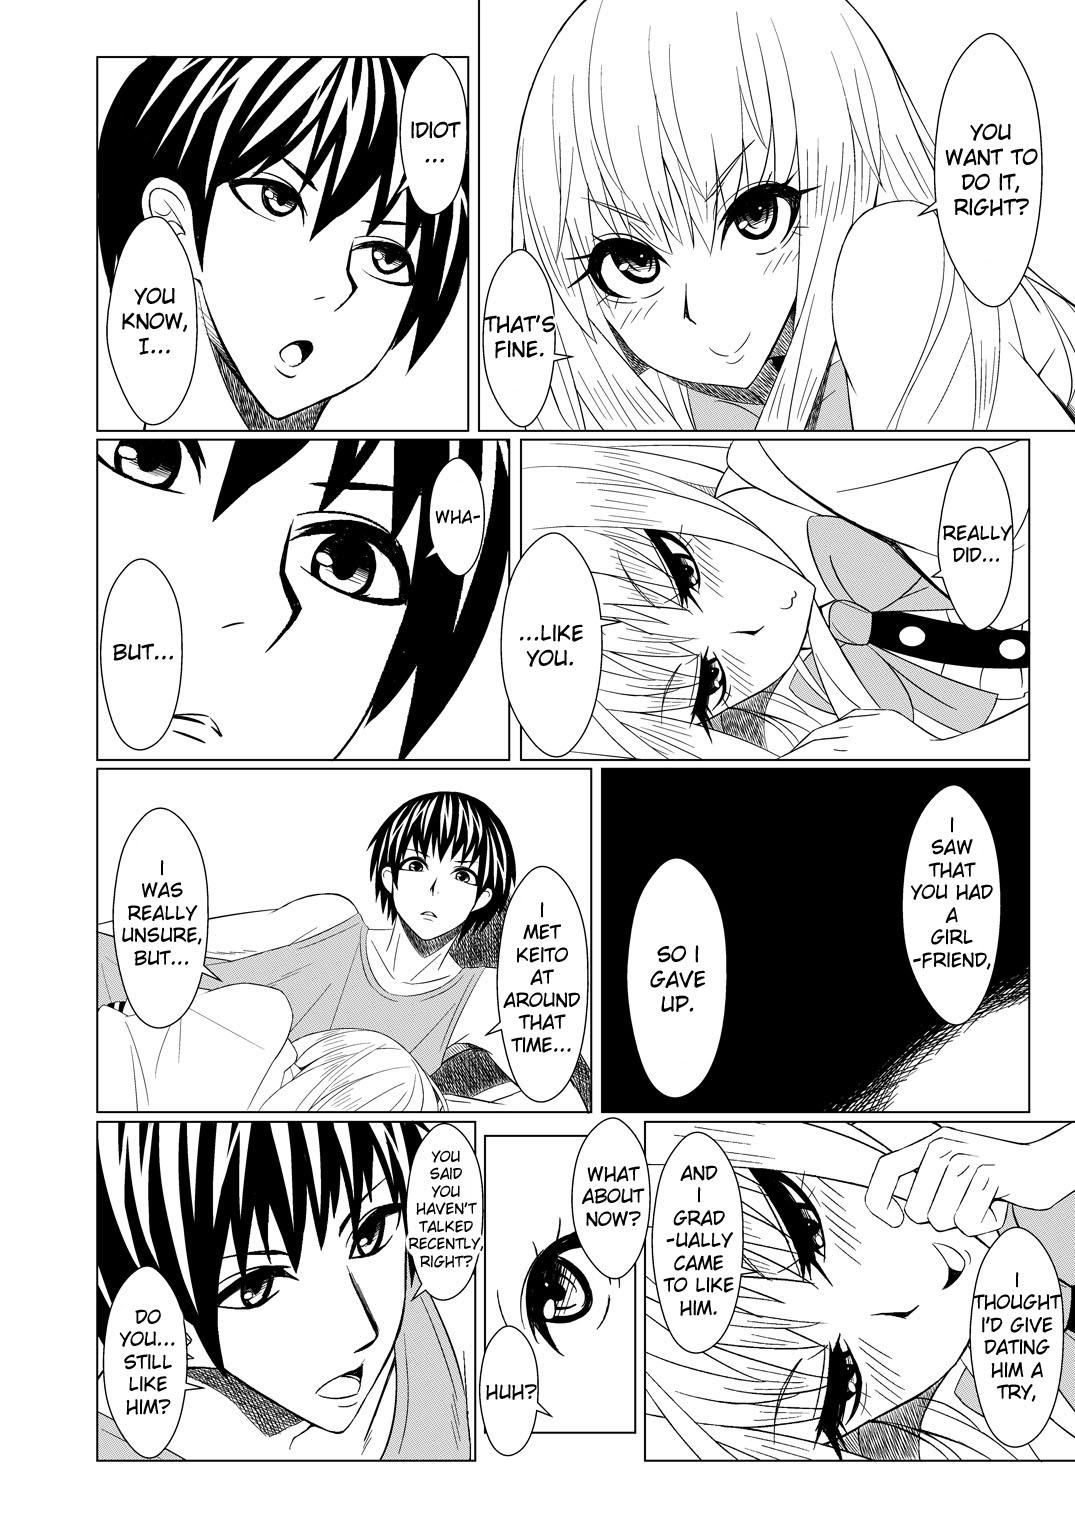 Piroca Tenshi came to my Place - Touhou project Couples - Page 5